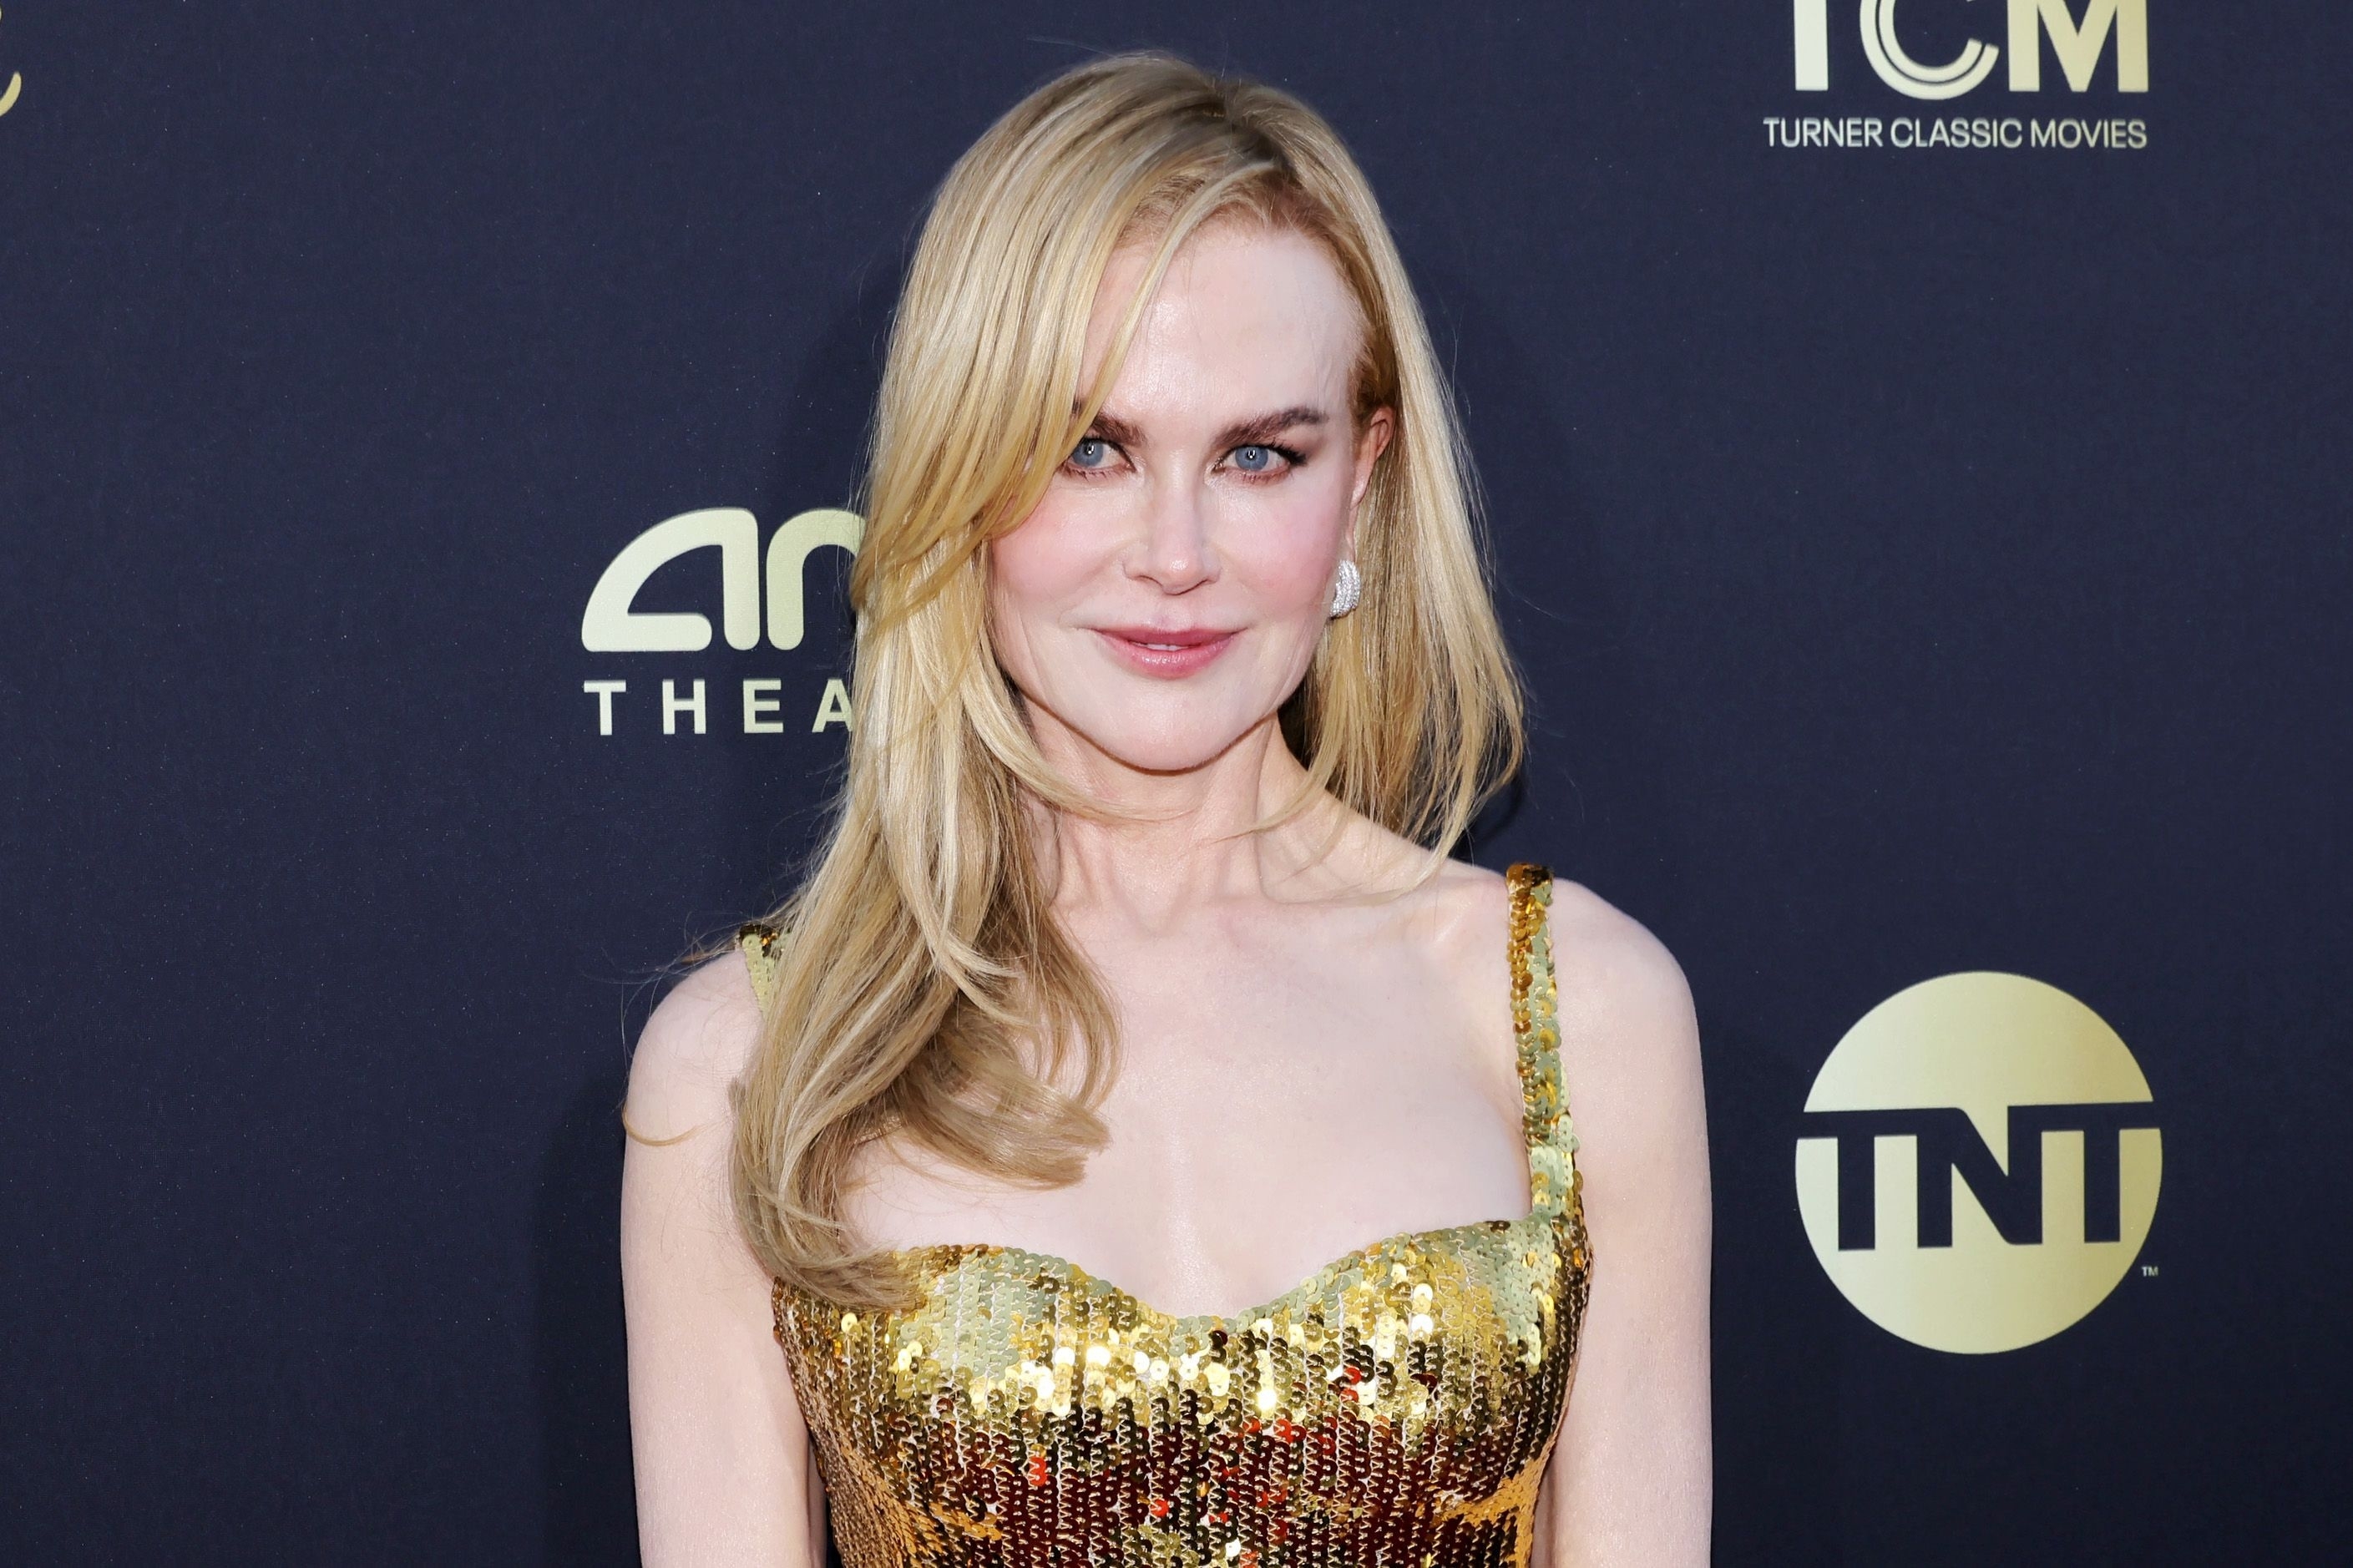 Nicole Kidman at an event, wearing a sparkly, fitted dress with a glittering pattern. The background has logos for Turner Classic Movies and TNT